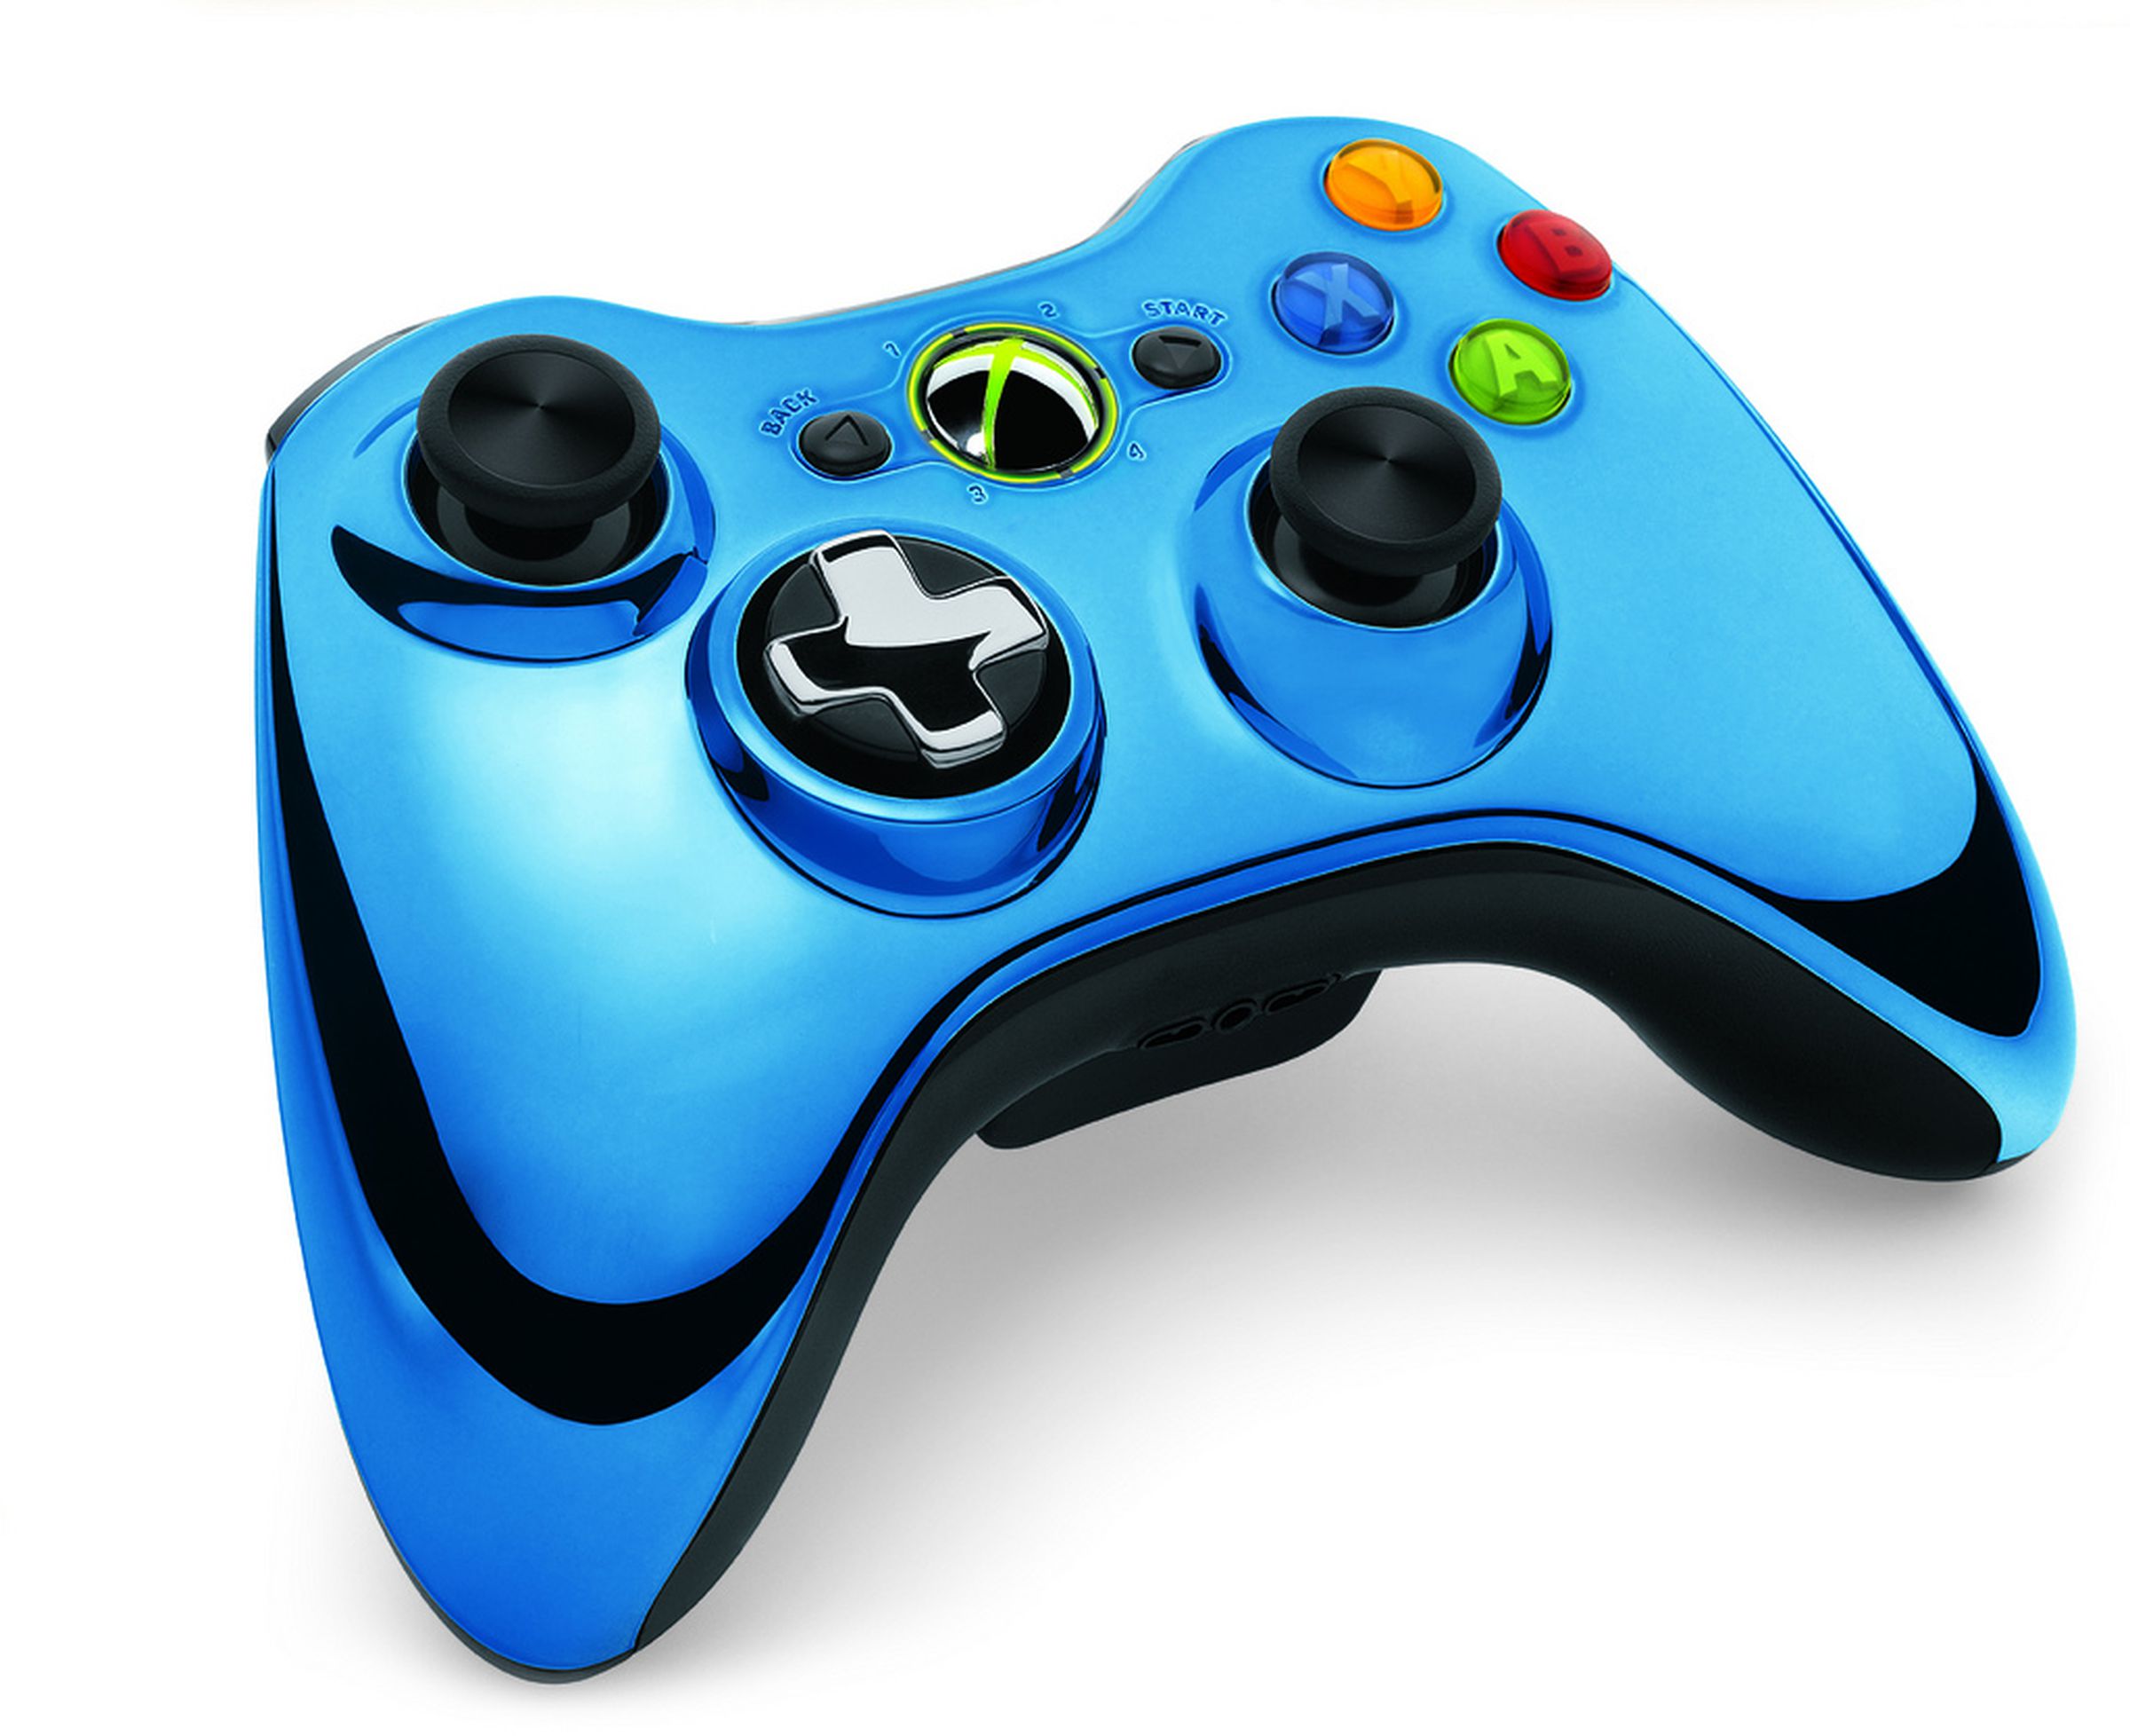 Chrome Xbox 360 controller hit in May.